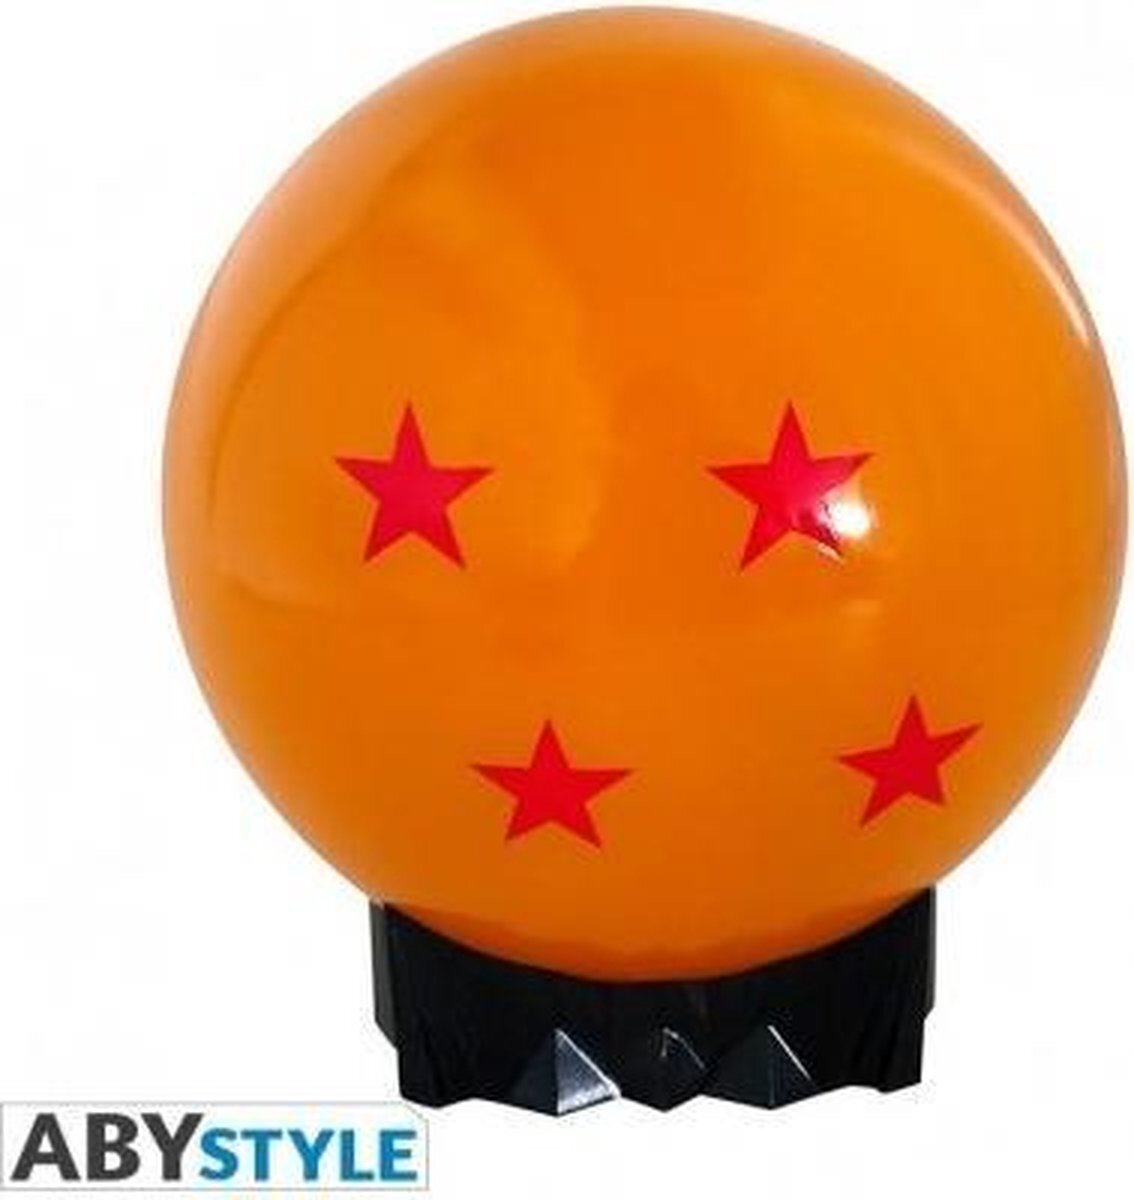 Abystyle Dragonball Z Crystal Light